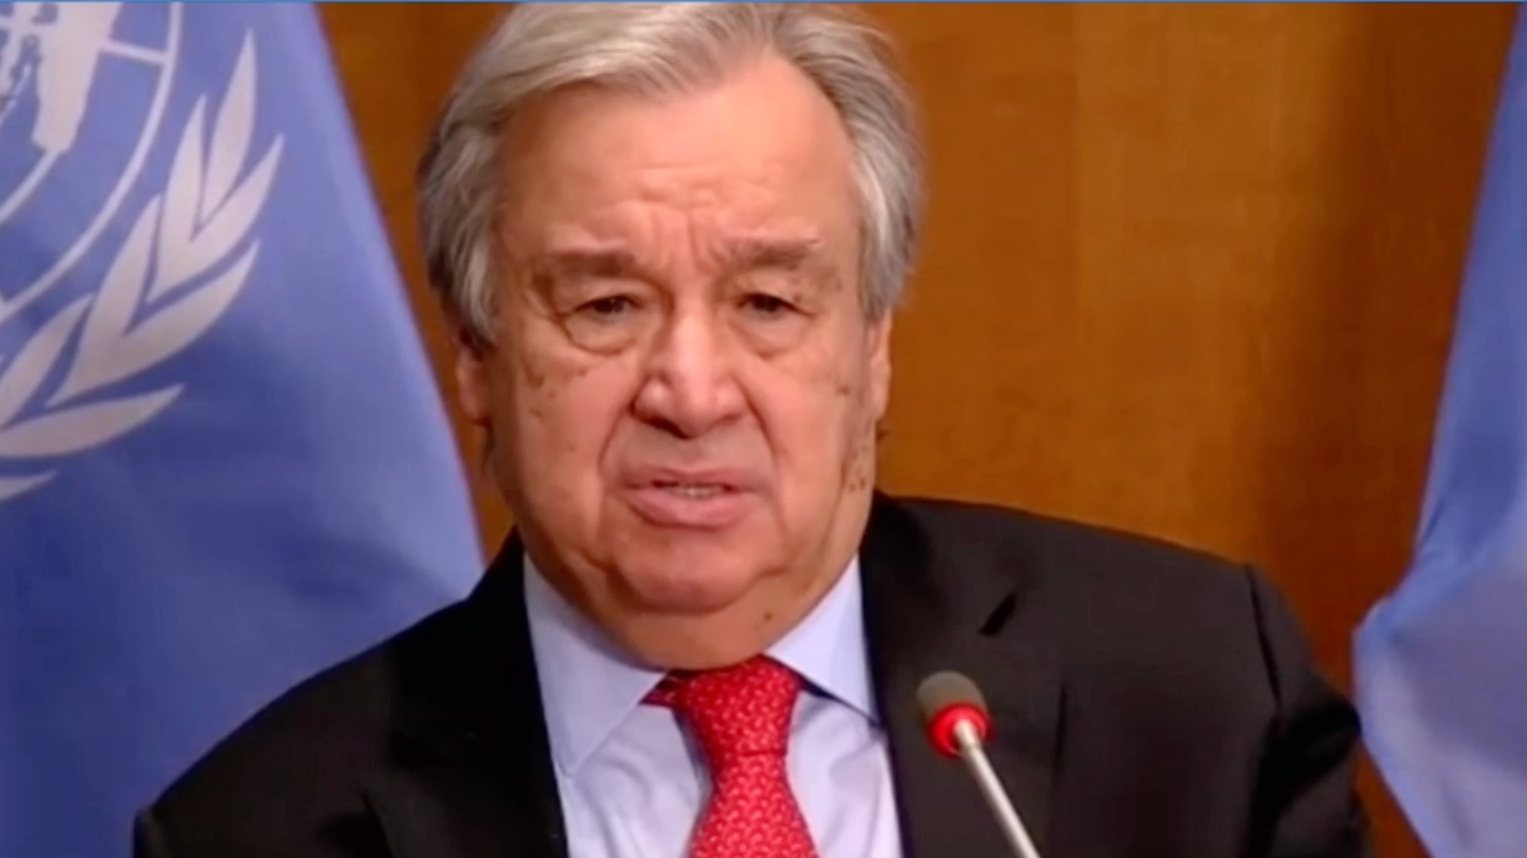 epa08964975 A still image obtained from a live video feed by the World Economic Forum (WEF) shows Secretary-General of the United Nations Antonio Guterres as he delivers Special Address during a virtual meeting of the World Economic Forum, 25 January 2021. The World Economic Forum (WEF) was scheduled to take place in Davos. Due to the Coronavirus outbreak, it will be held online in a digital format from January, 25-29.  EPA/PASCAL BITZ / WEF HANDOUT MANDATORY CREDIT / HANDOUT EDITORIAL USE ONLY/NO SALES